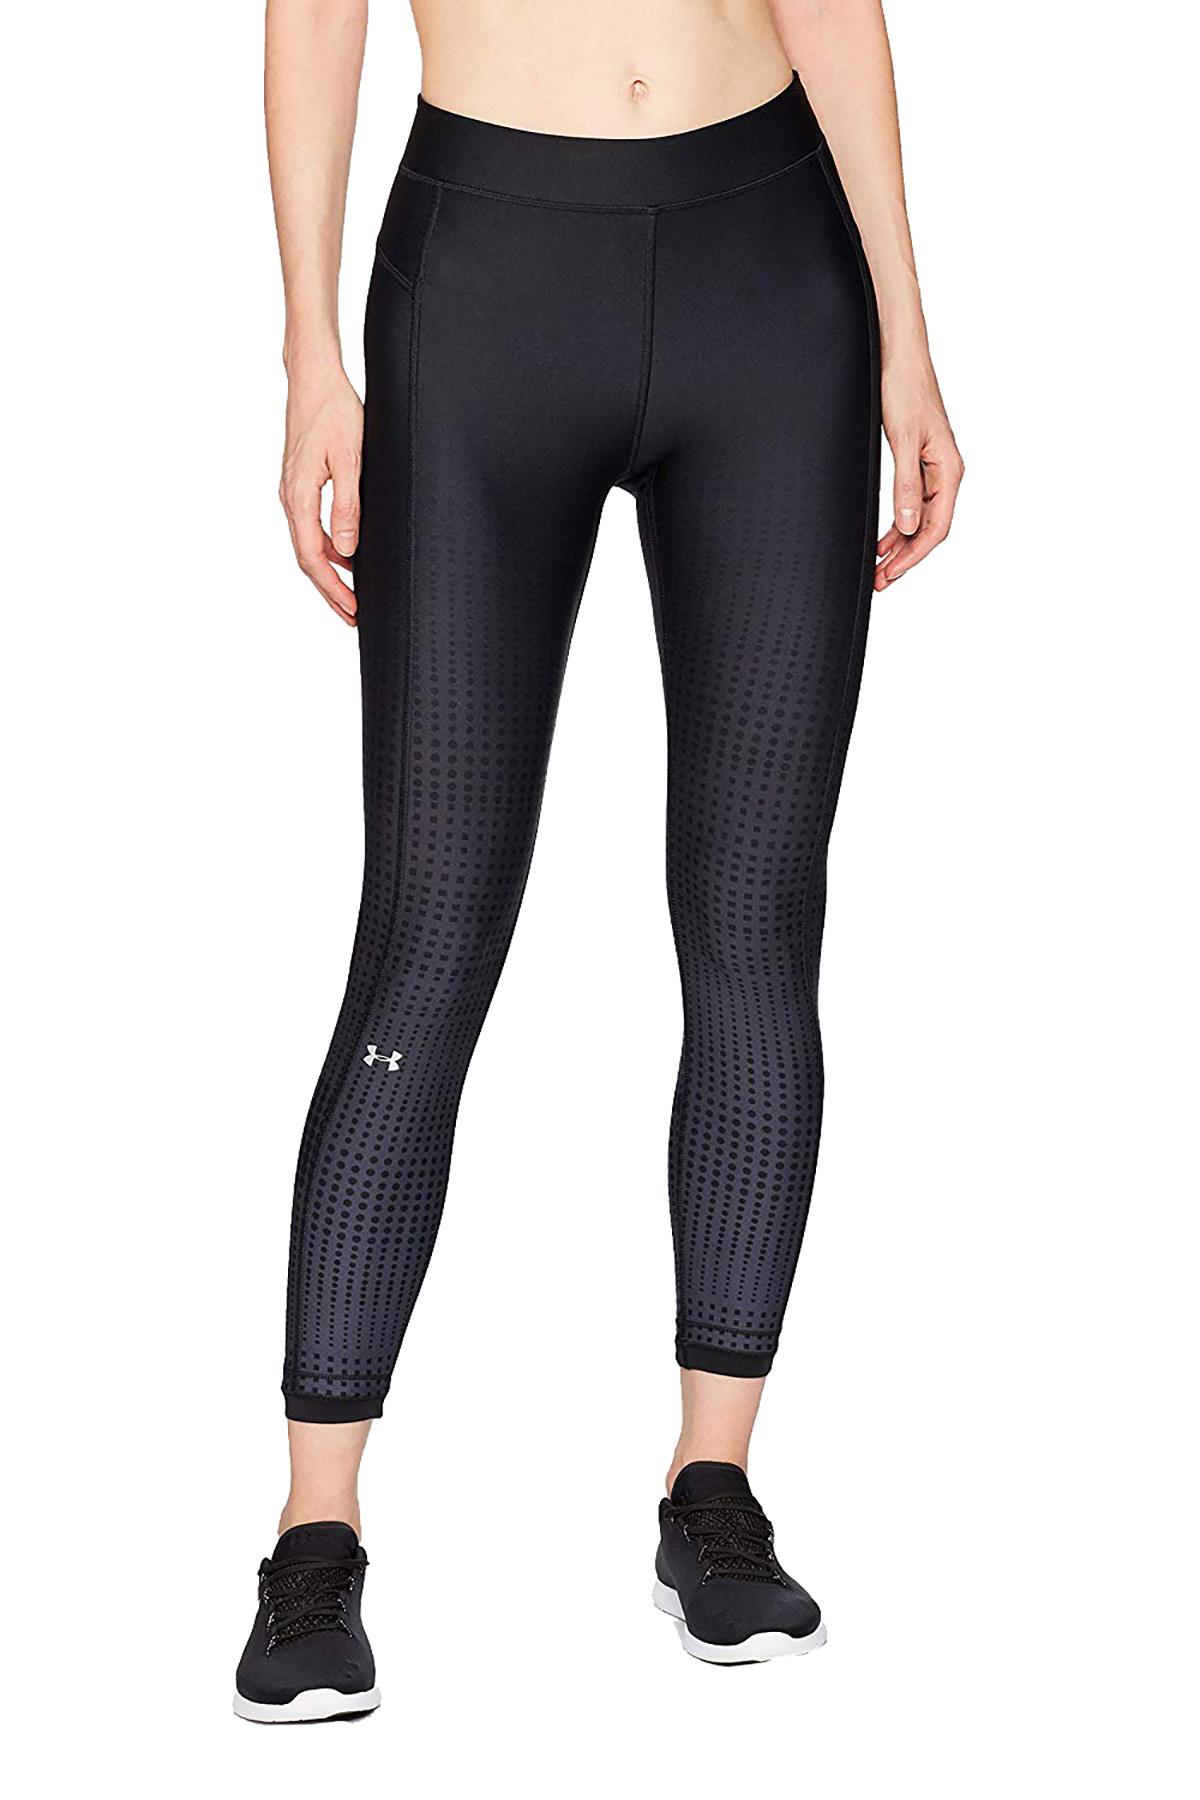 Under Armour Black-Stealth/Grey-Metallic Printed Compression Ankle